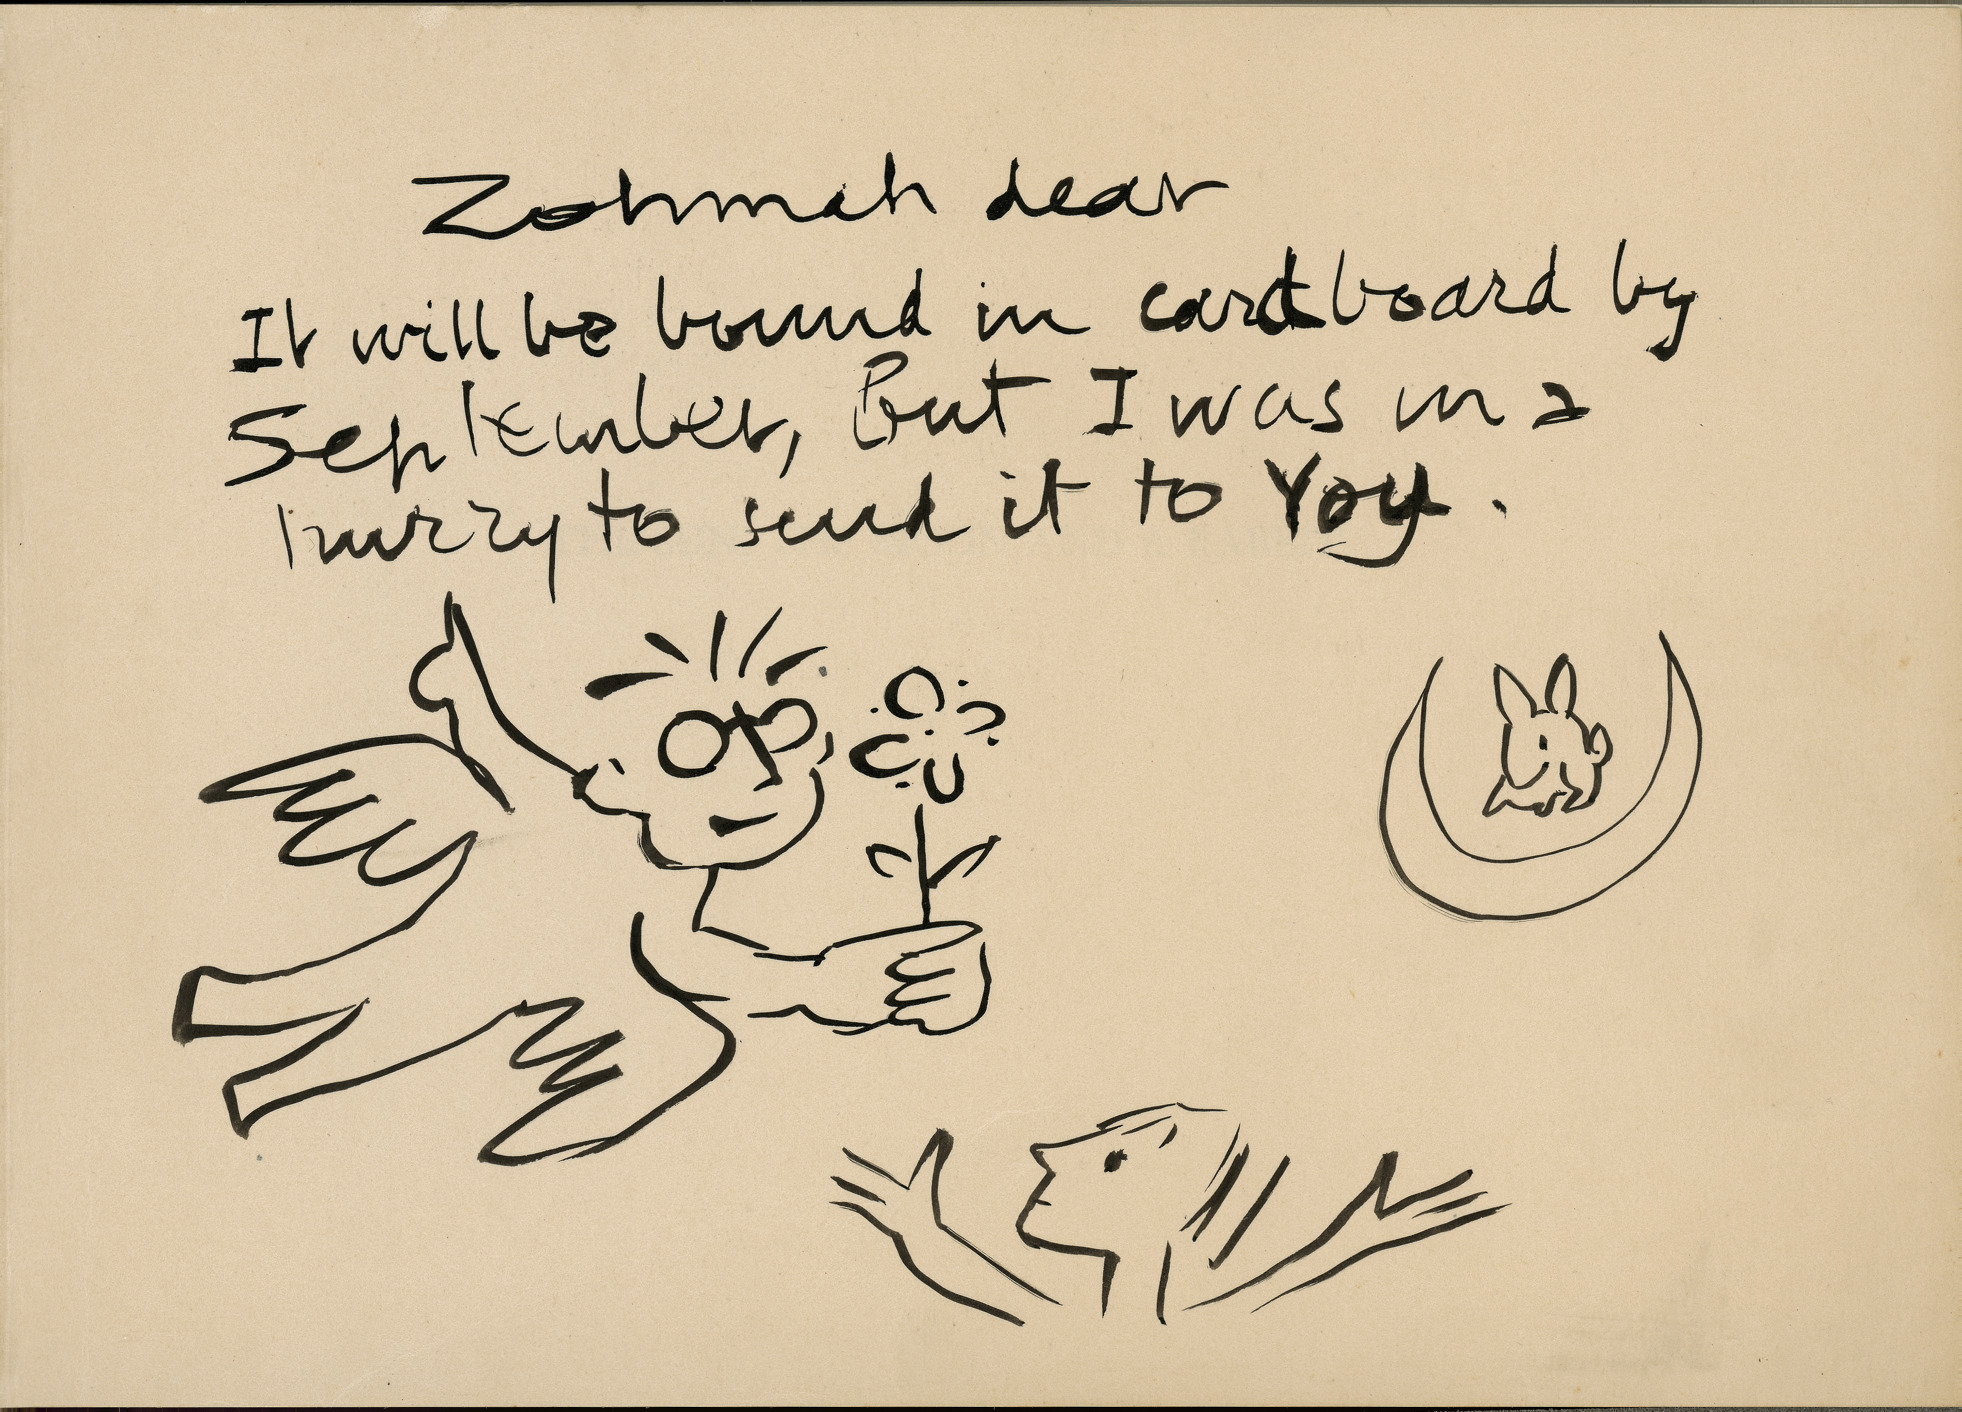 Personal note from Jean Charlot to Zohmah Charlot written on blank page at front of a copy of 'The Sun, the Moon and a Rabbit', written by Amelia Martinez del Rio.